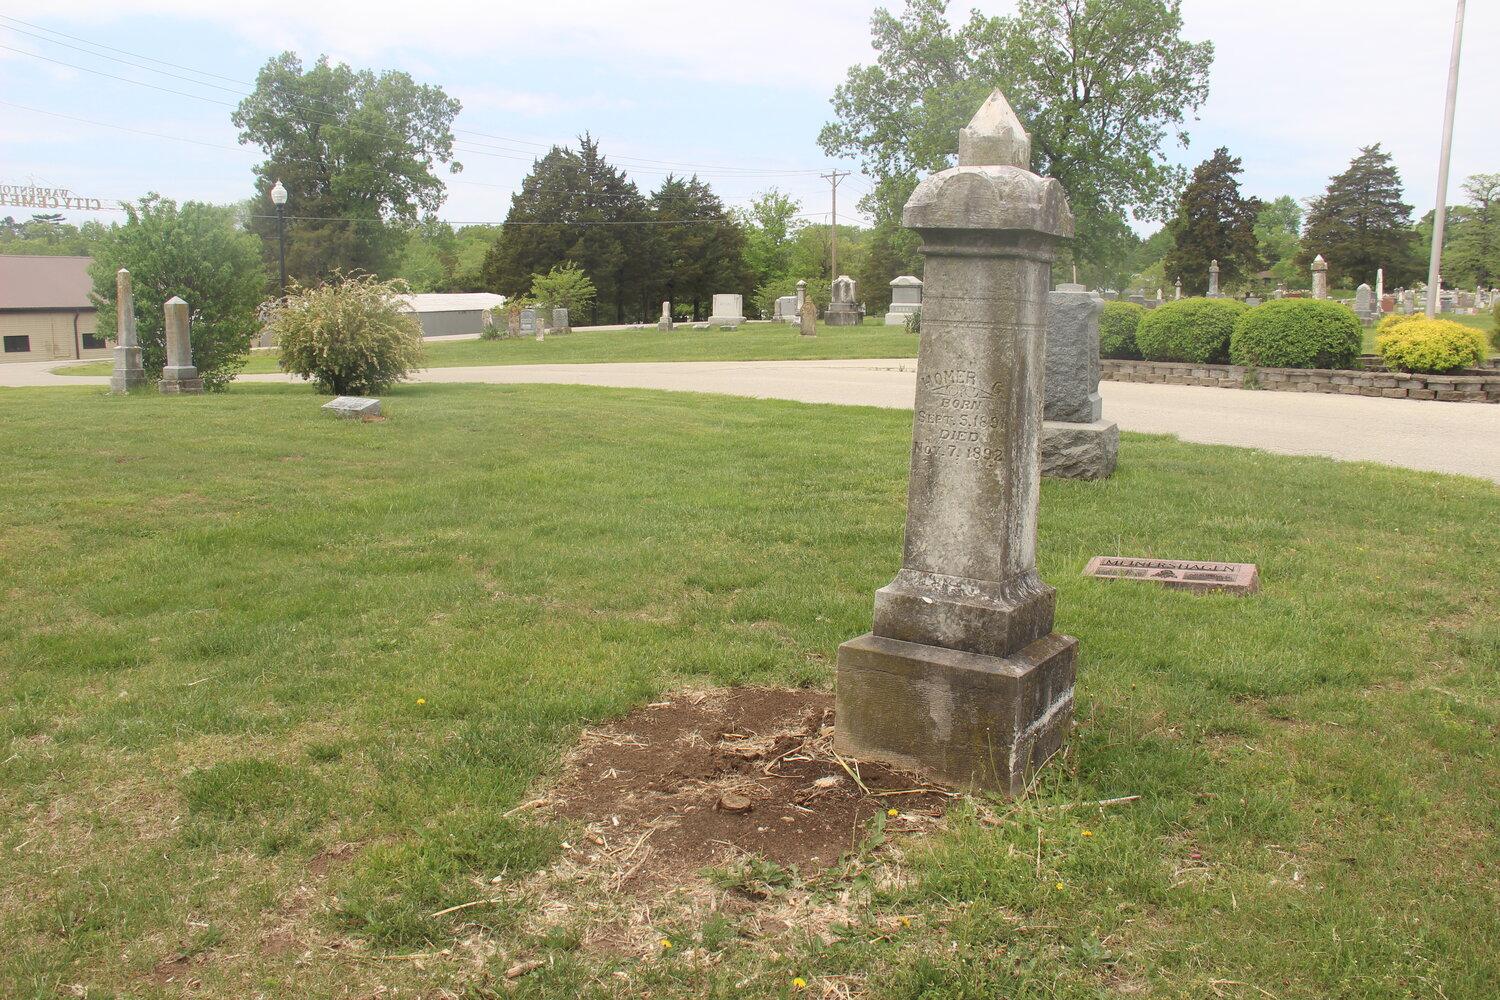 Older stones are grandfathered in, and the city is taking precautions to avoid damaging the memorials during cutting season.